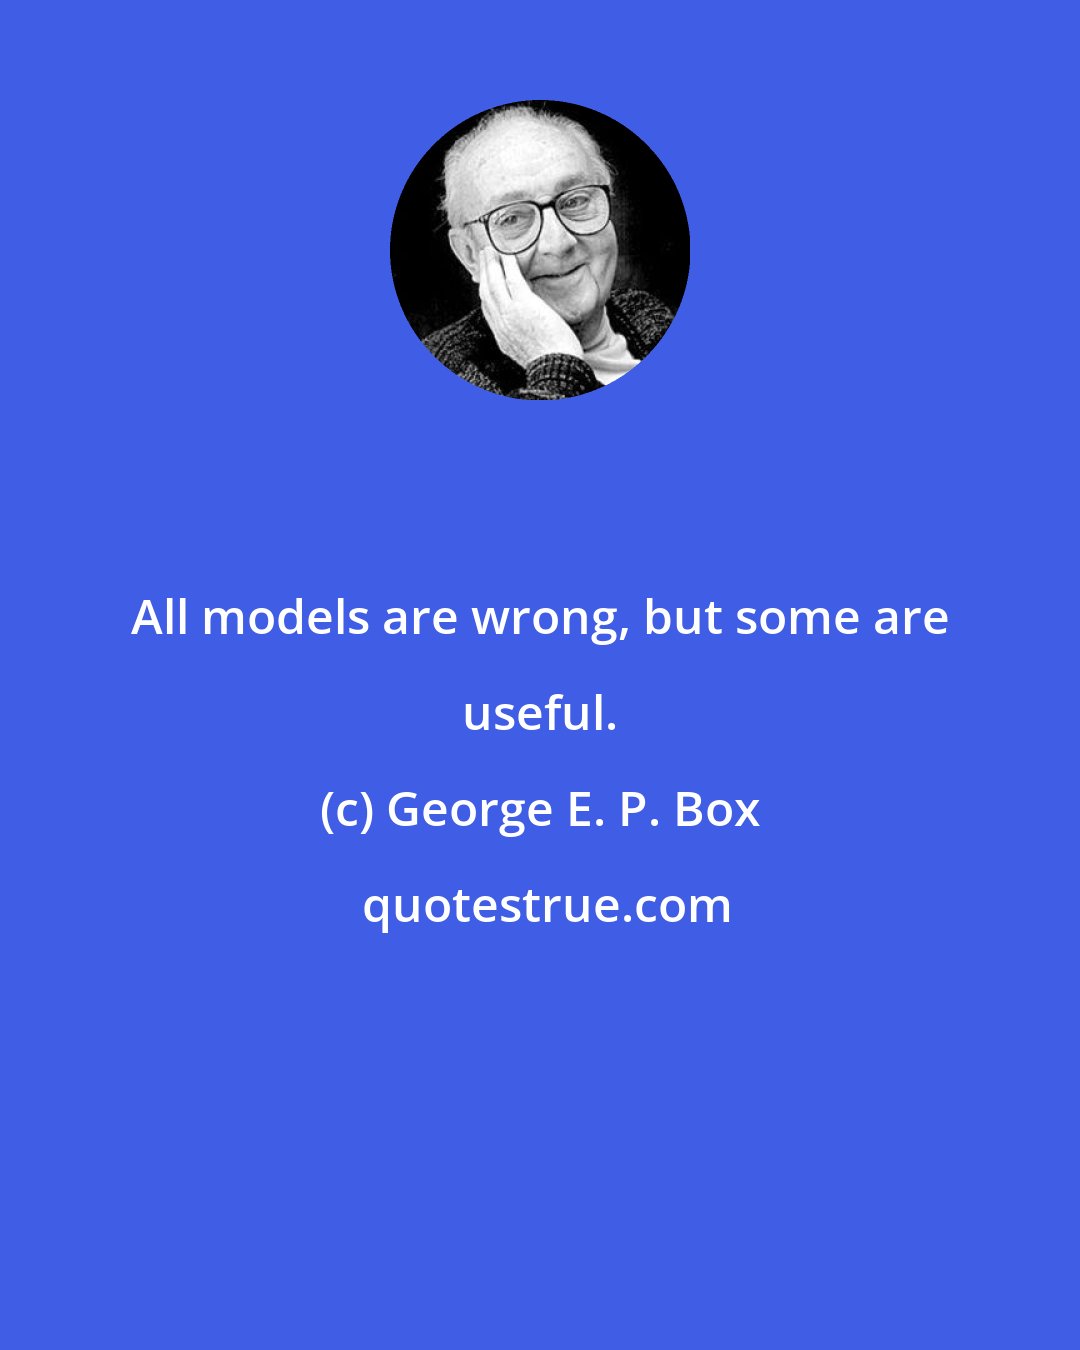 George E. P. Box: All models are wrong, but some are useful.